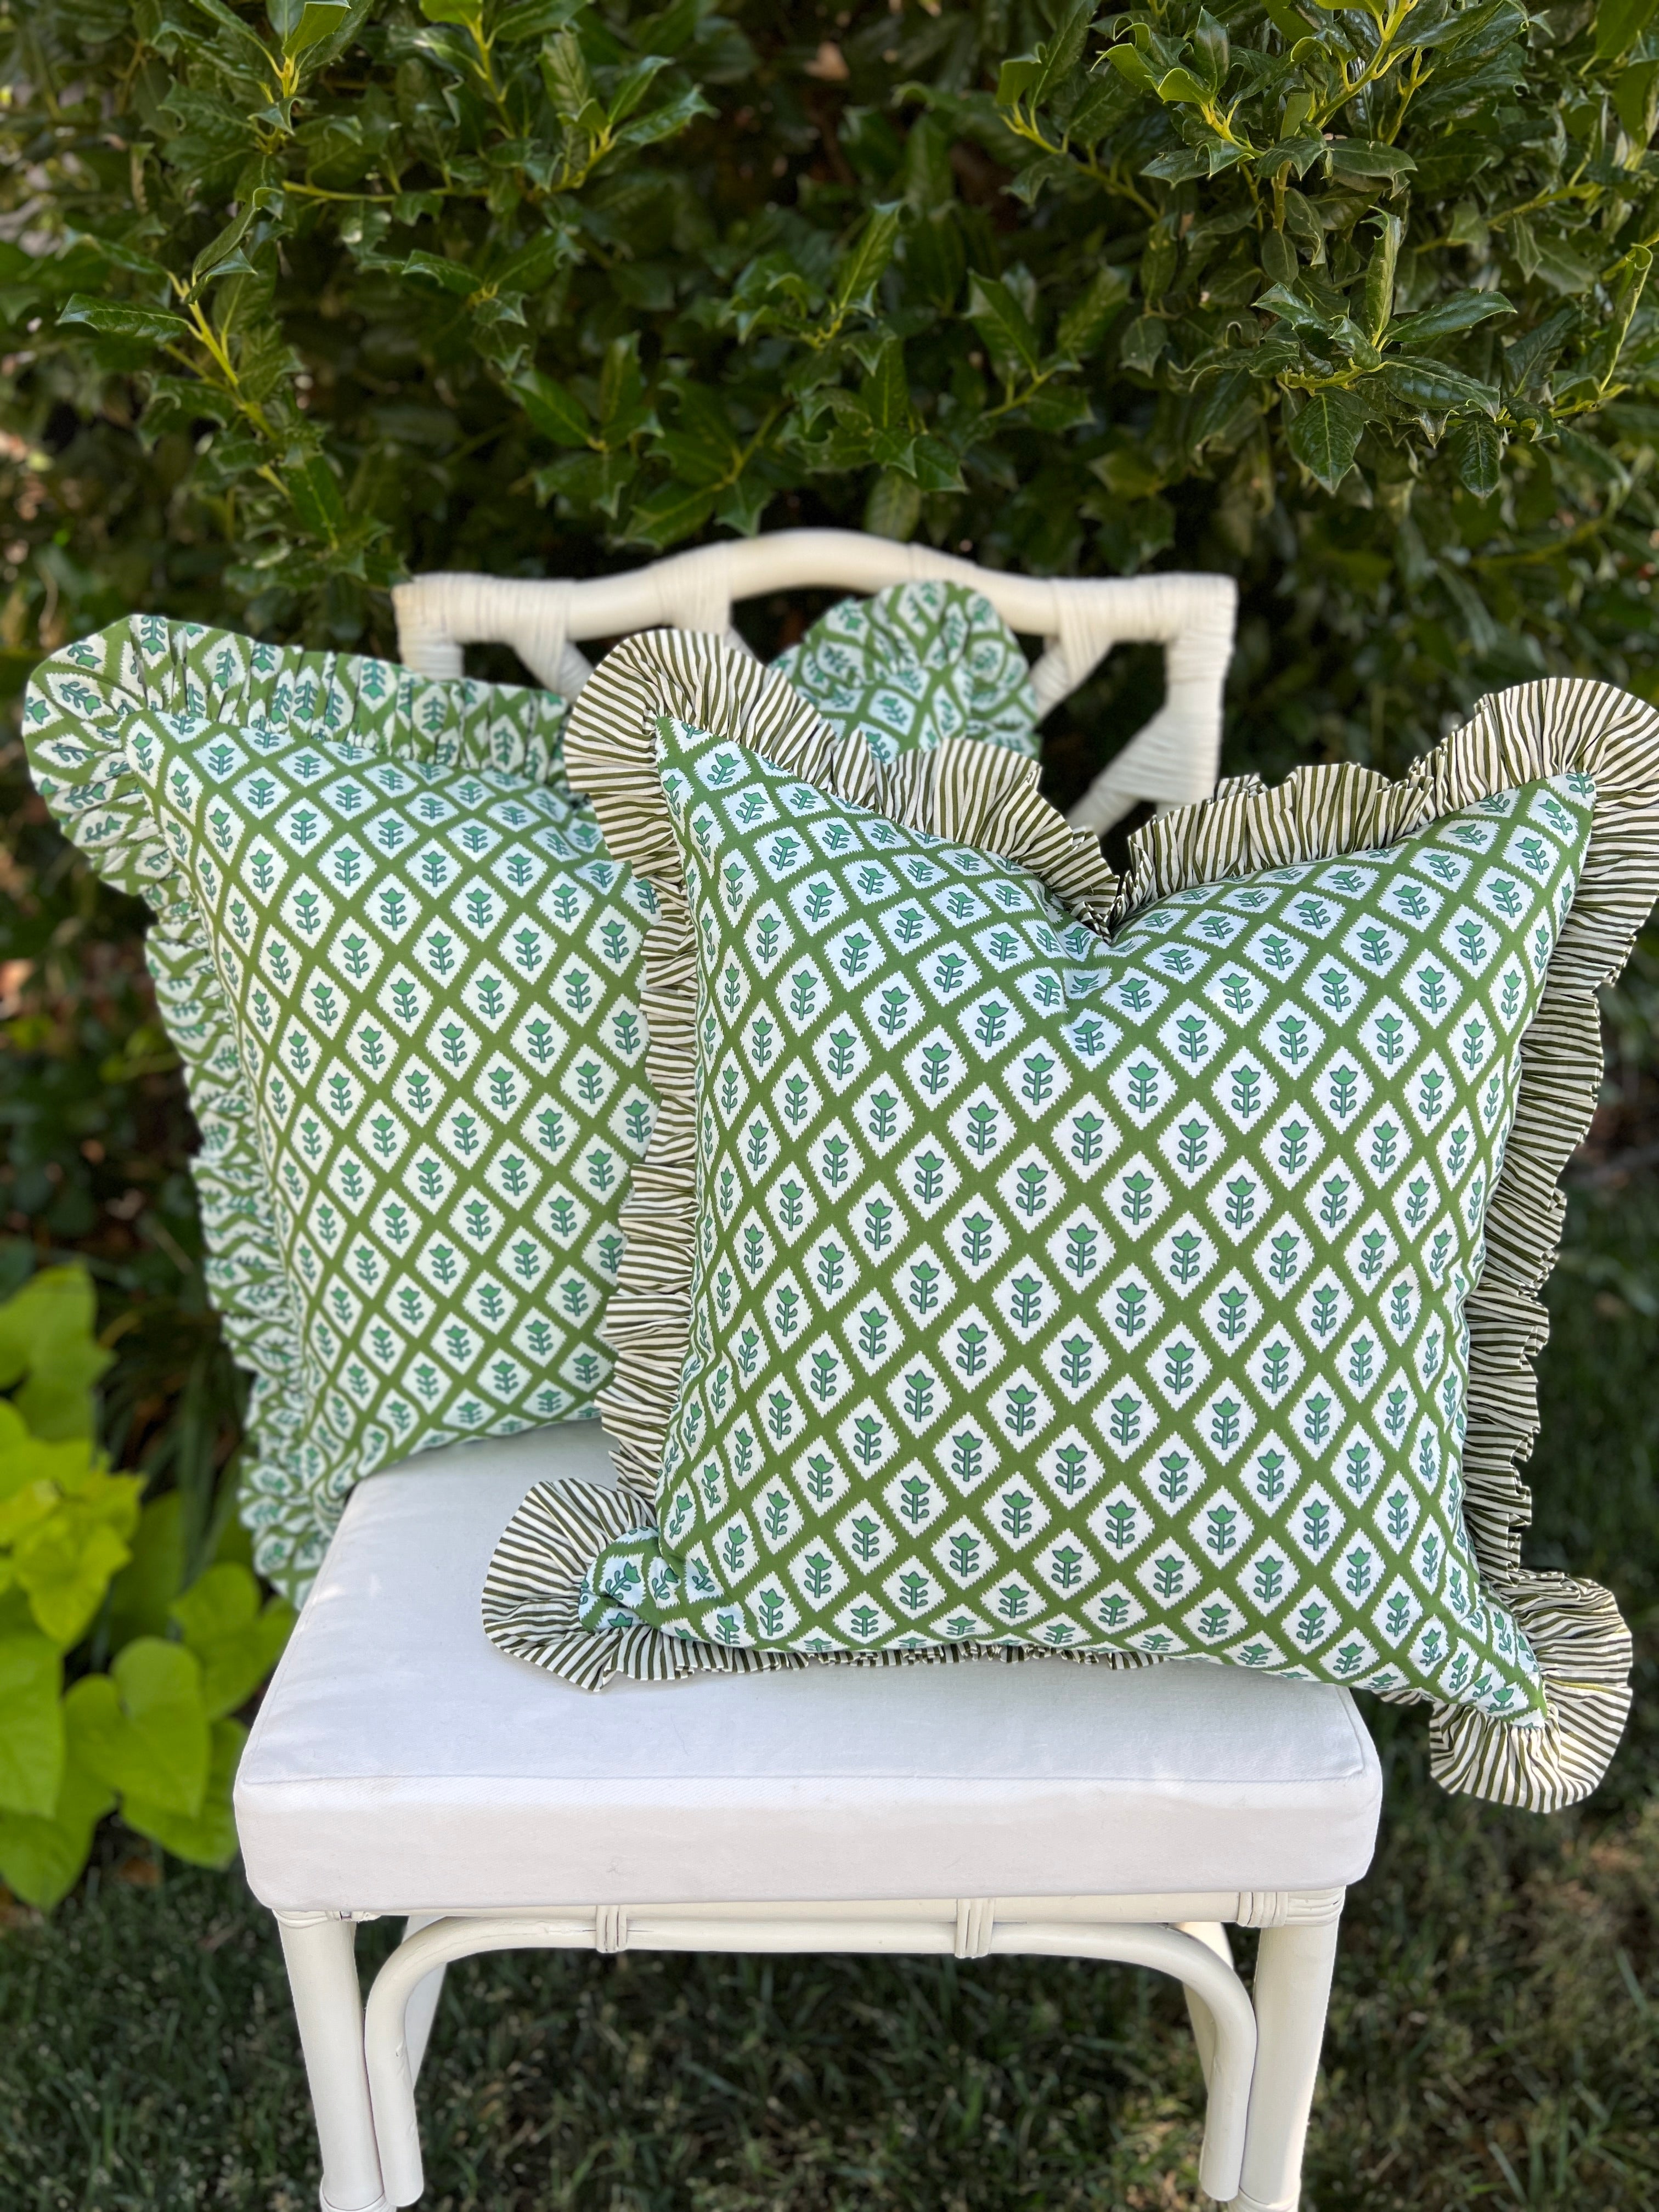 Yellow block print pillow cover with ruffle trim – Grace Harris Collection